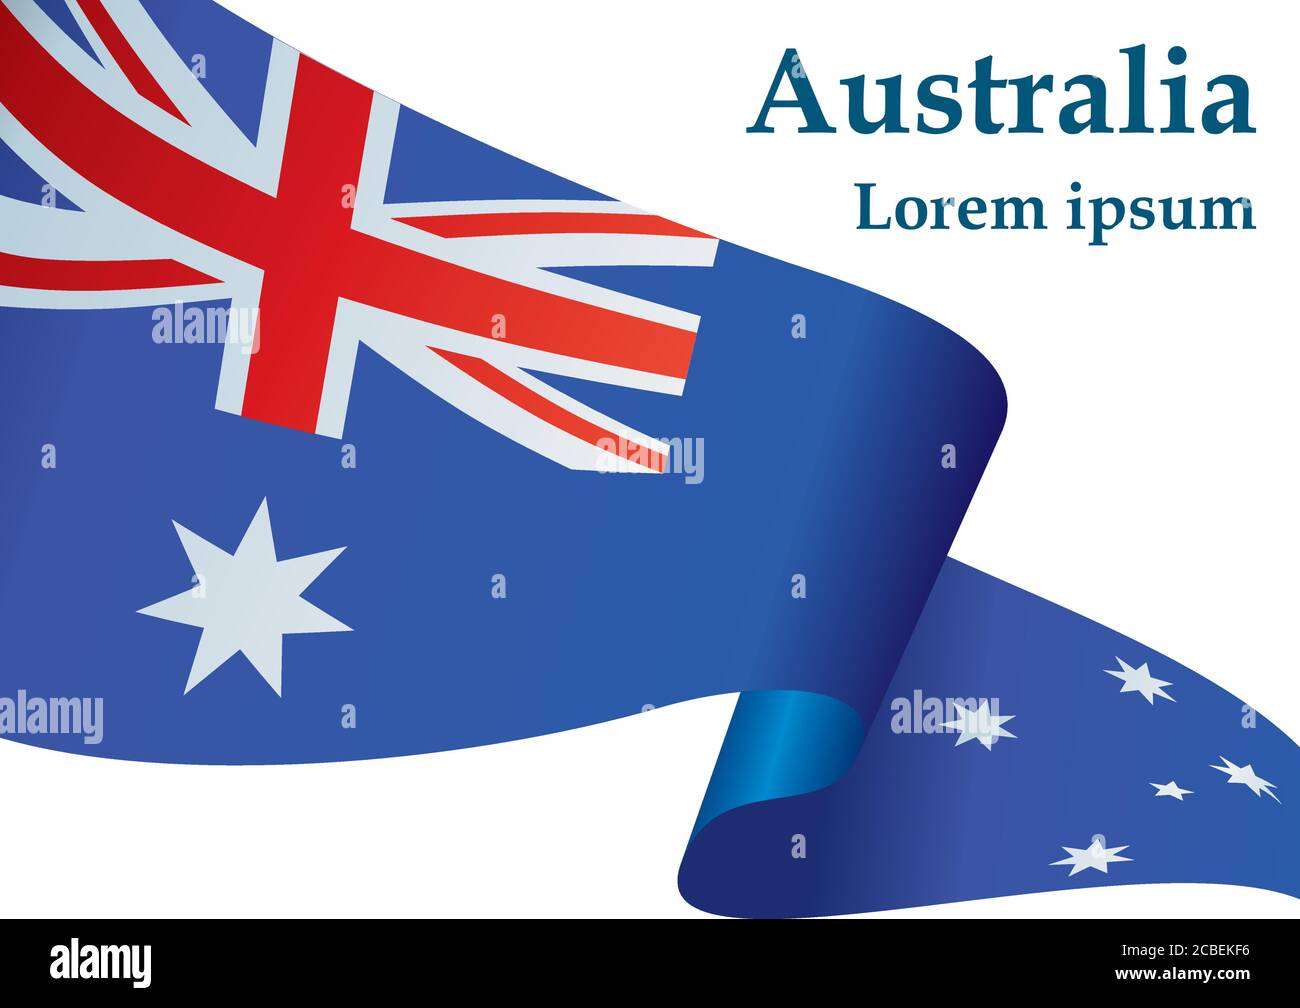 Flag of Australia, Commonwealth of Australia. Template design, an official document with the flag of Australia and other uses Image & Art - Alamy